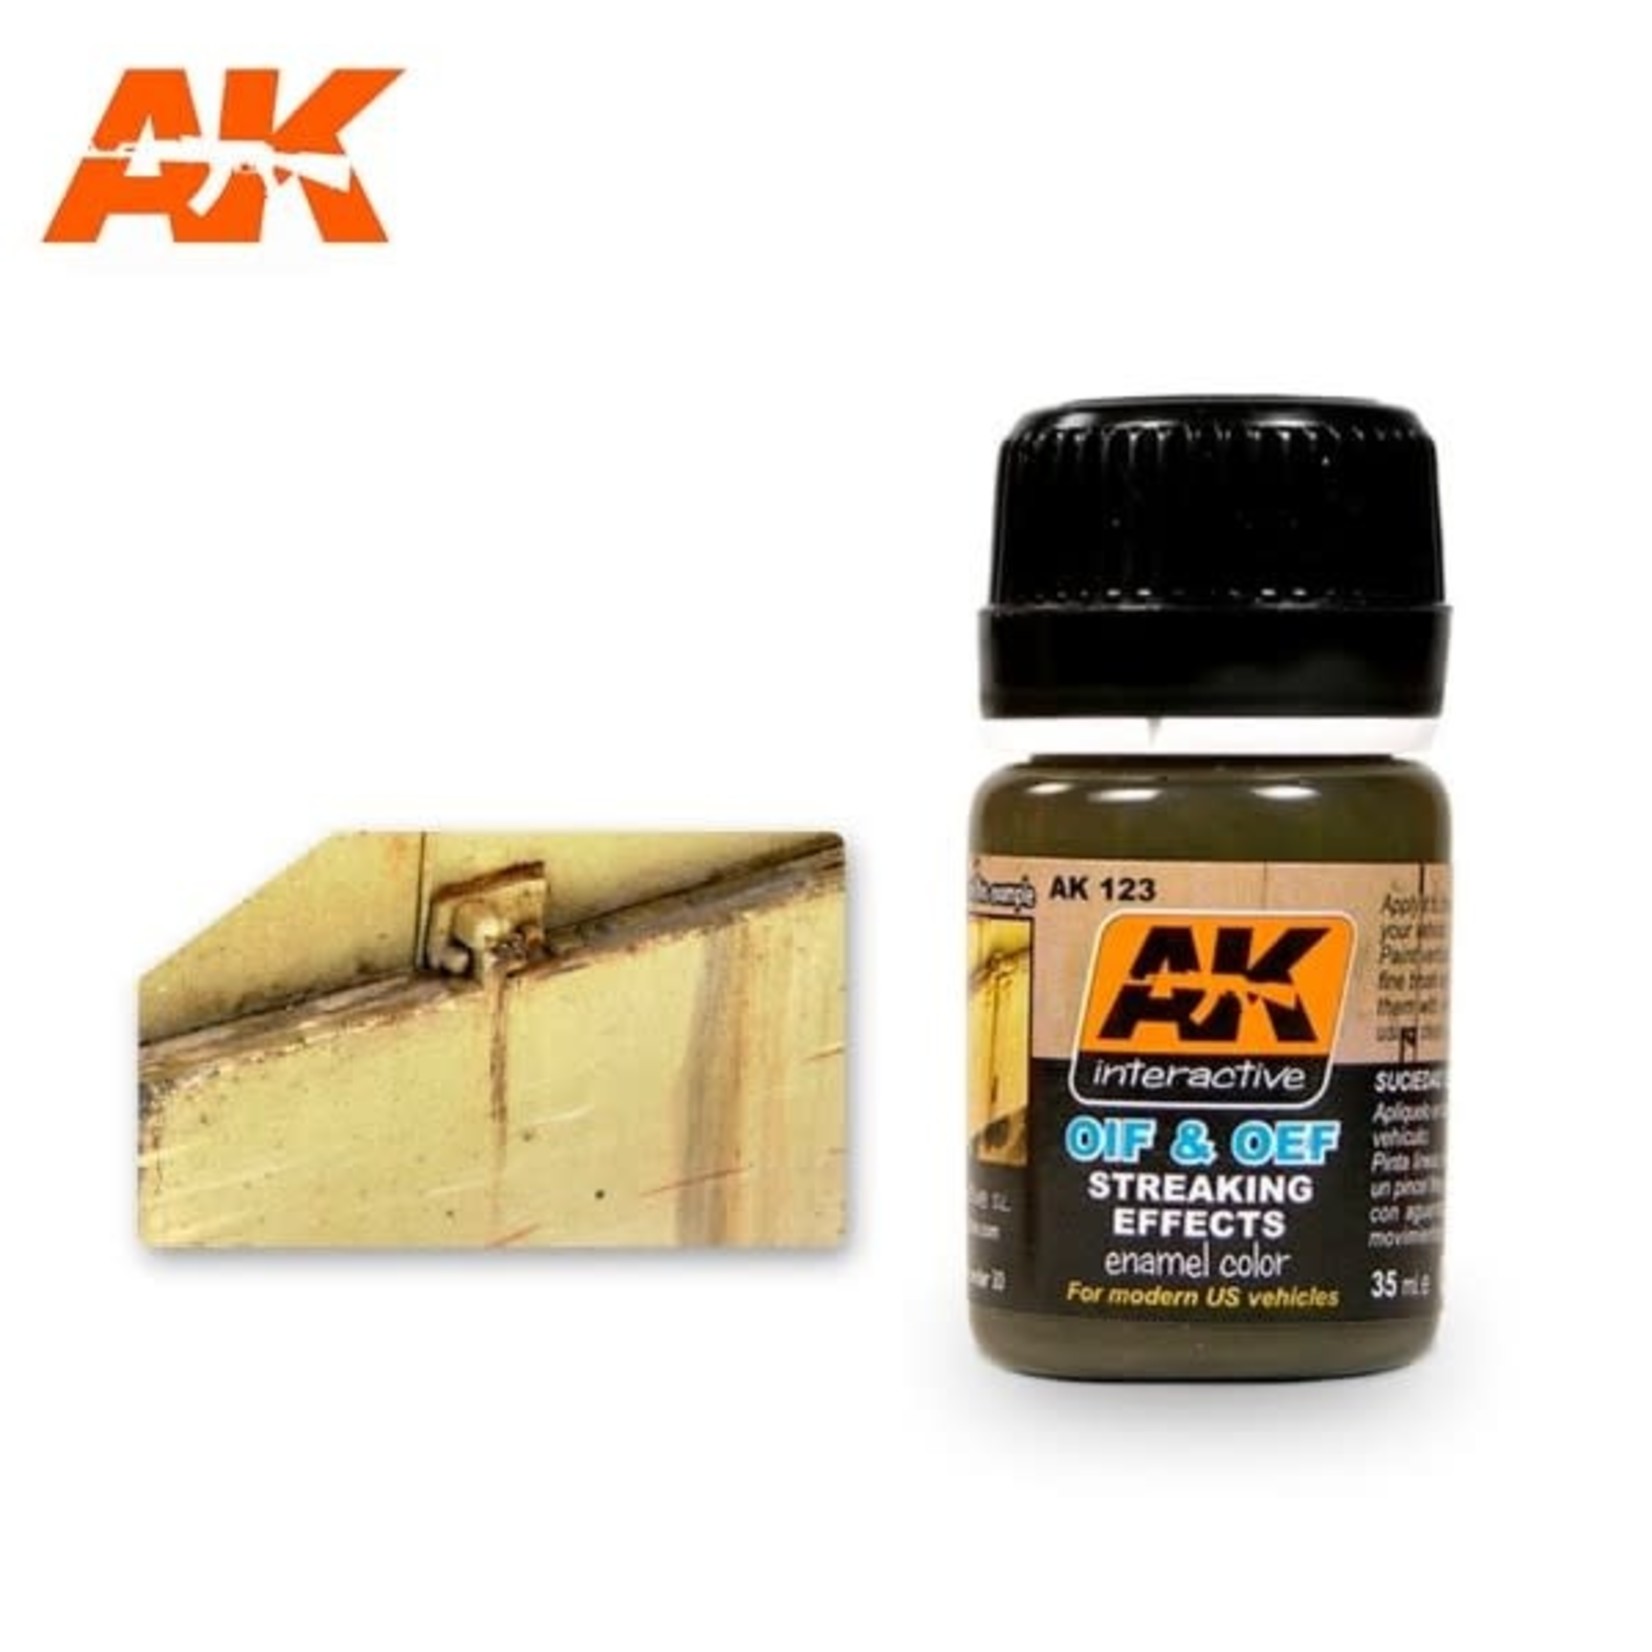 AK Interactive AK-123 Streaking Effects For Oif & Oef - Us Vehicles (35ml)